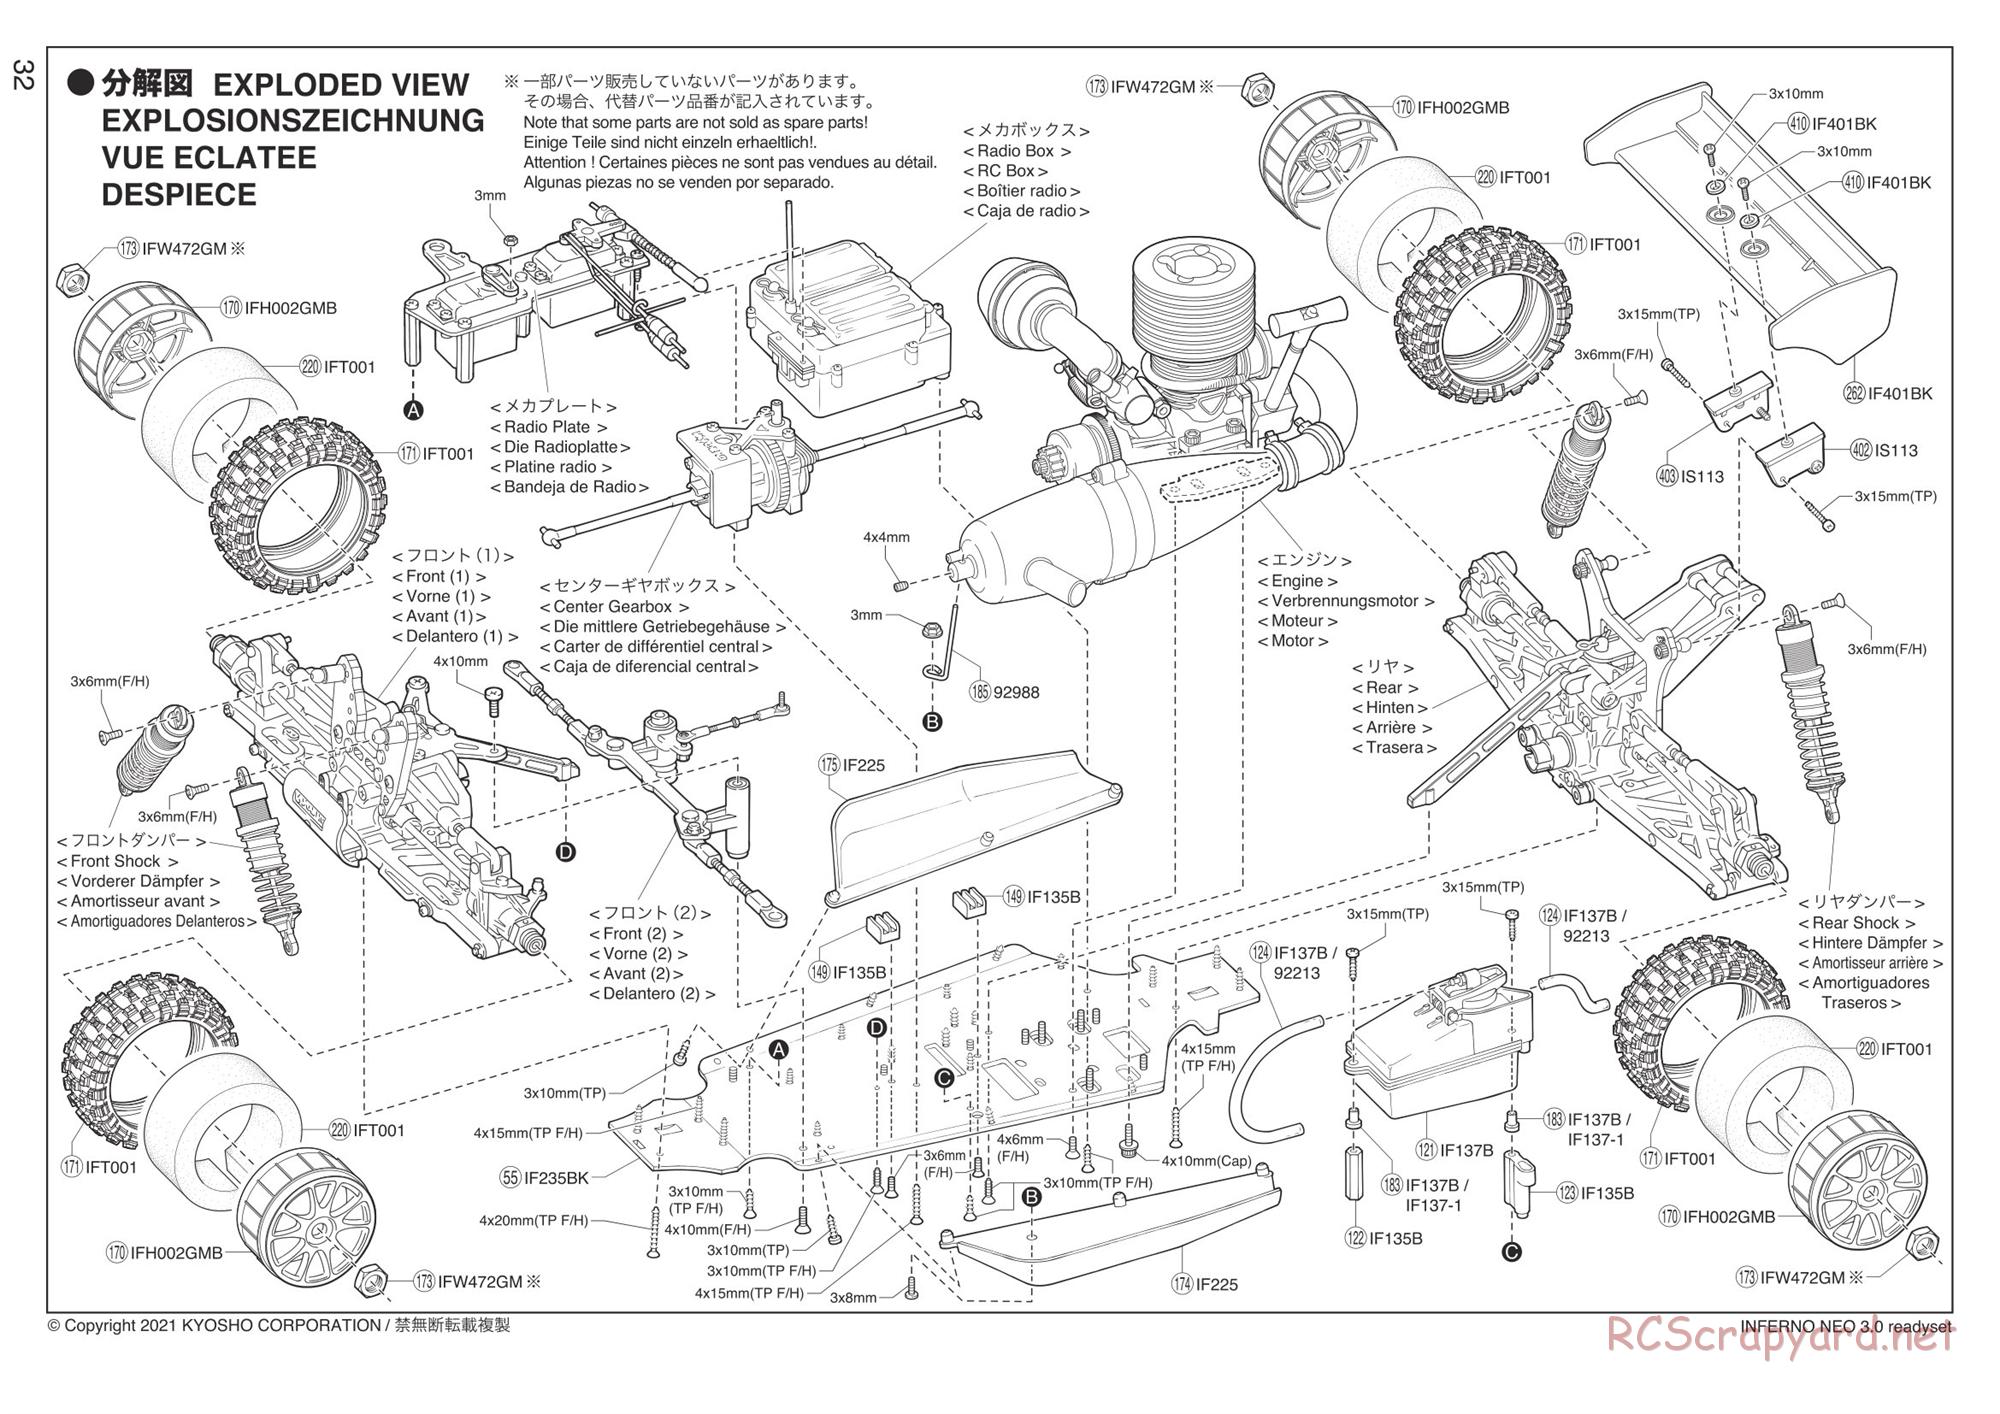 Kyosho - Inferno Neo 3.0 - Exploded Views - Page 1